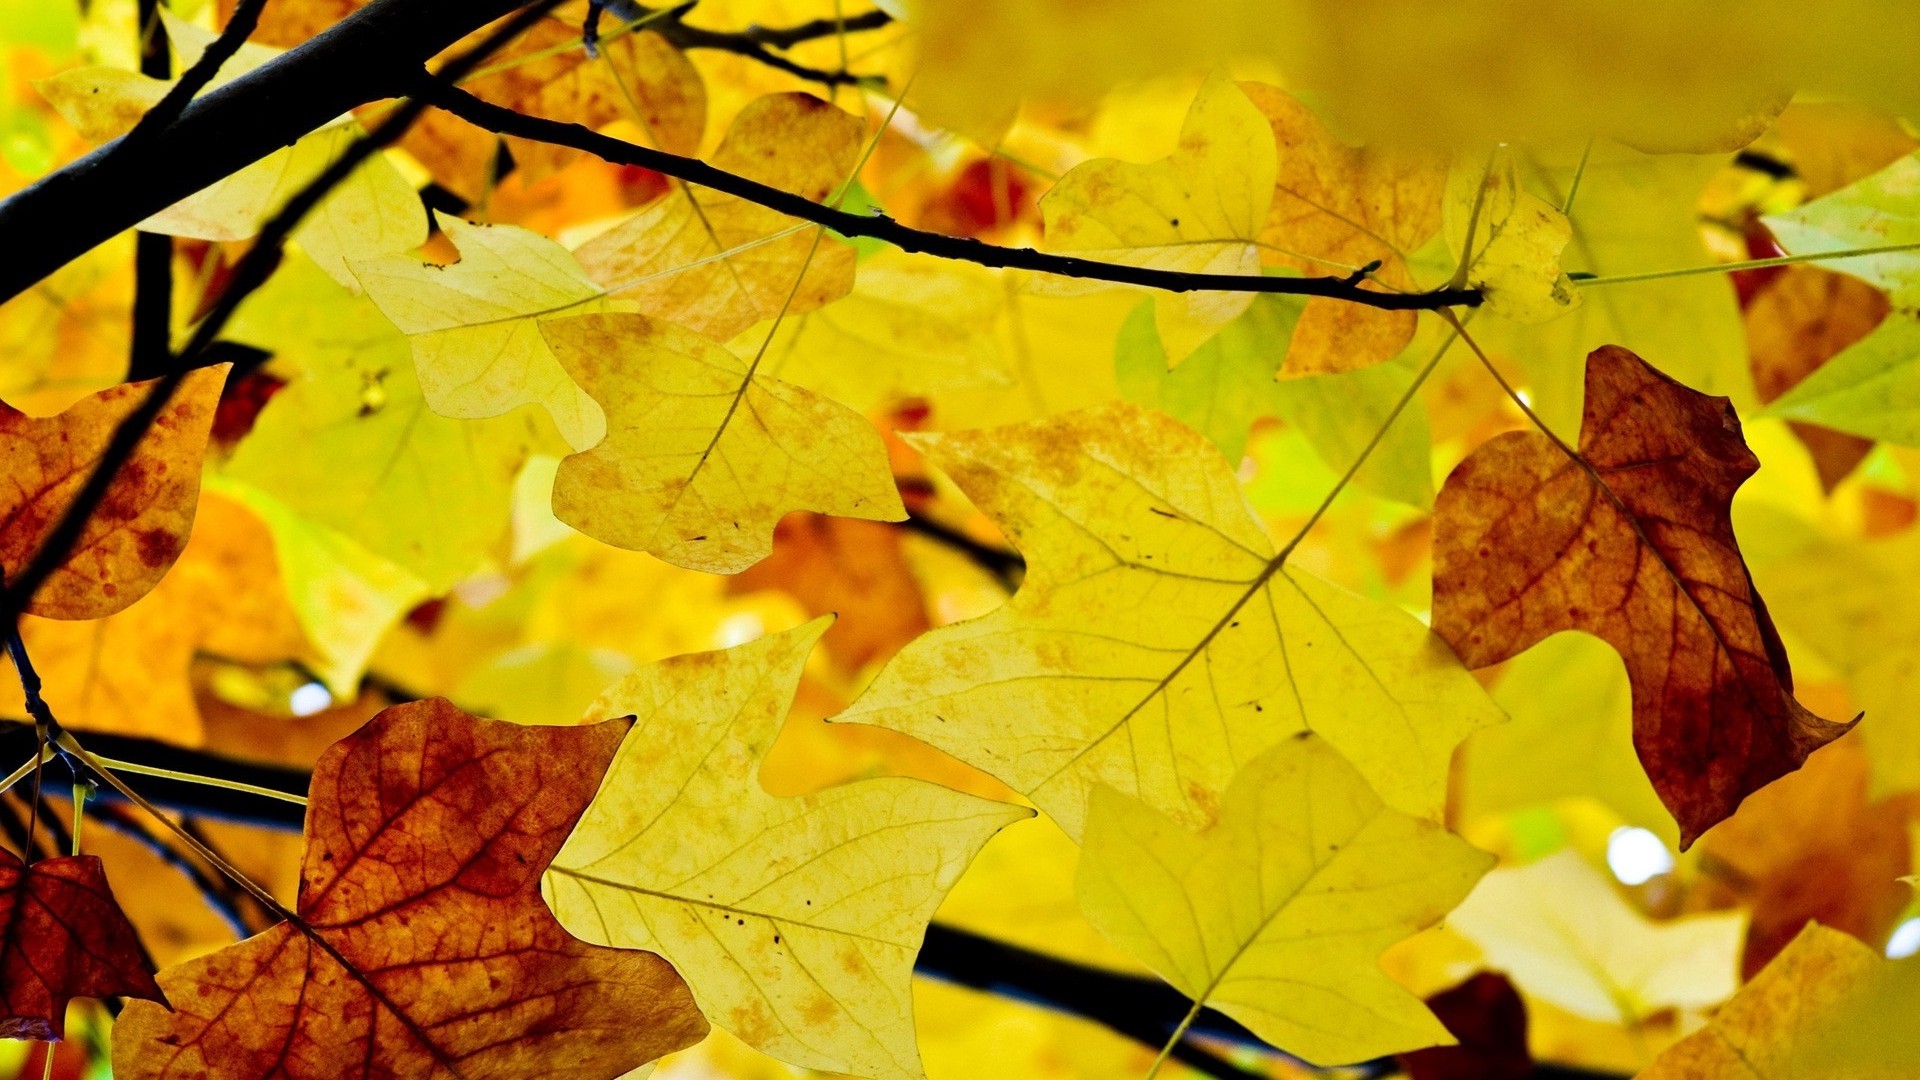 1920x1080 wallpapers: leaves, branches, autumn, yellow (image)